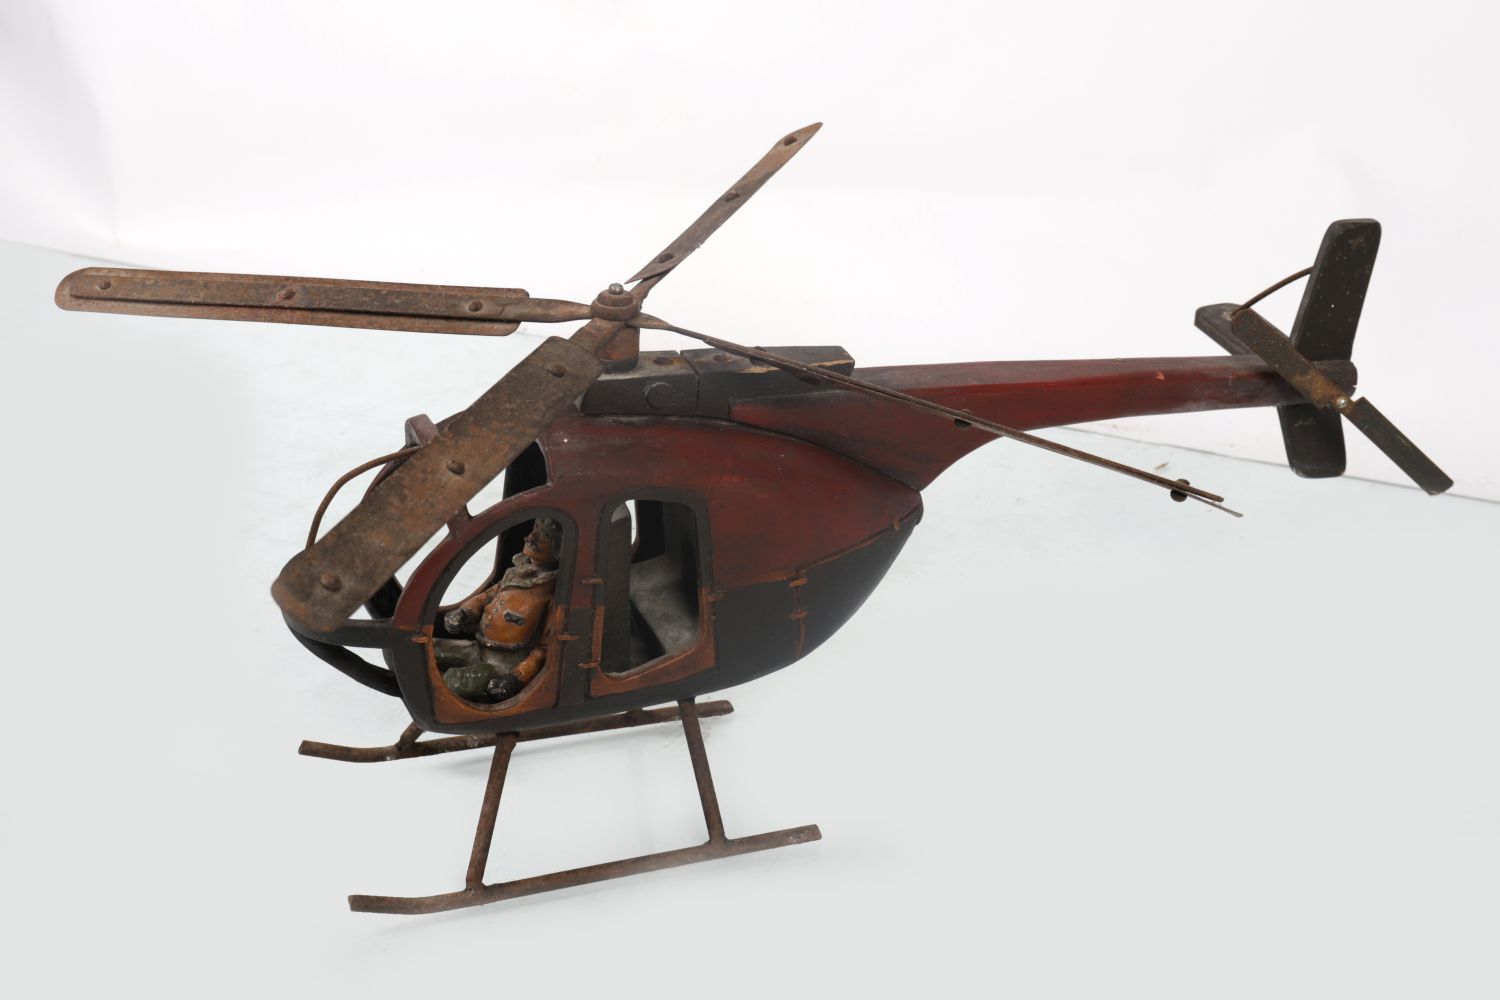 SCALE WOODEN MODEL OF A HELICOPTER - Image 2 of 3